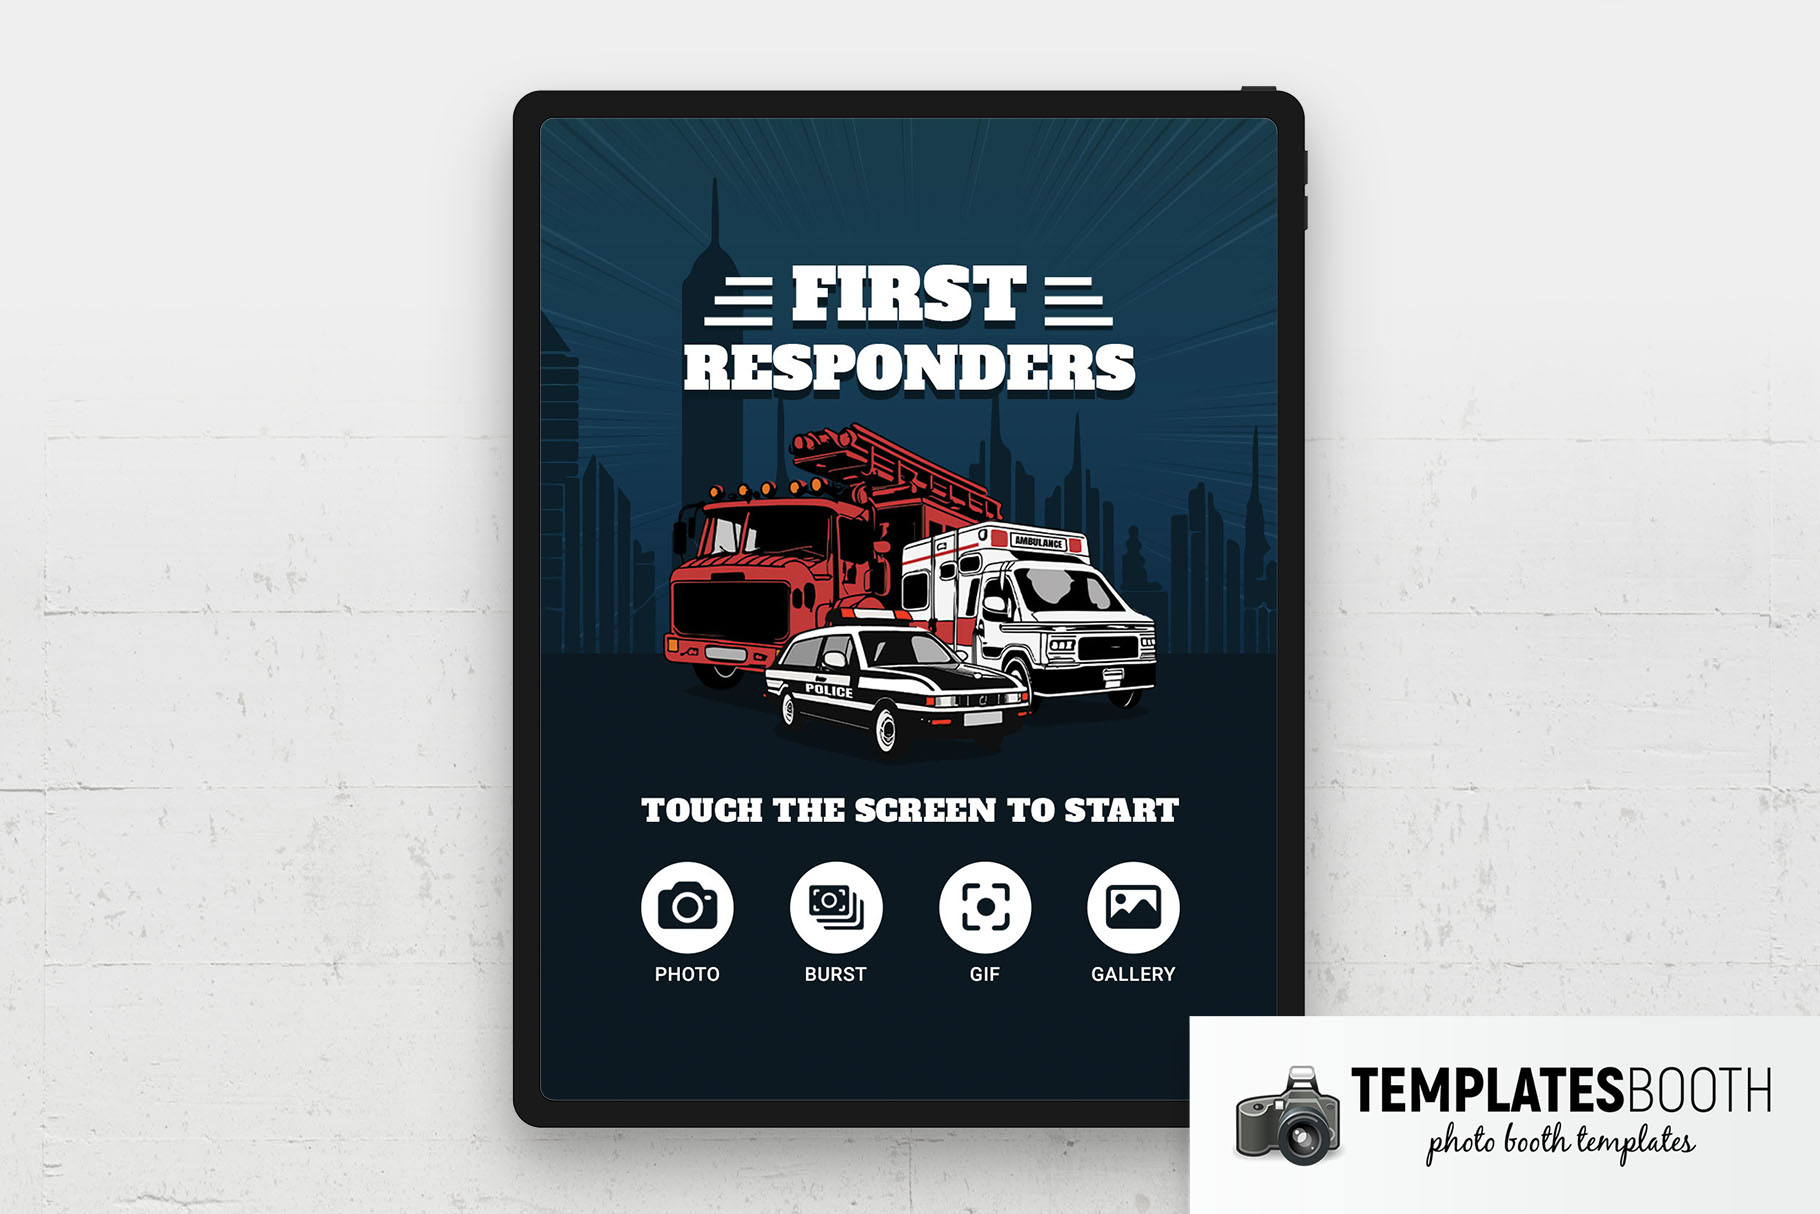 First Responders Photo Booth Welcome Screen